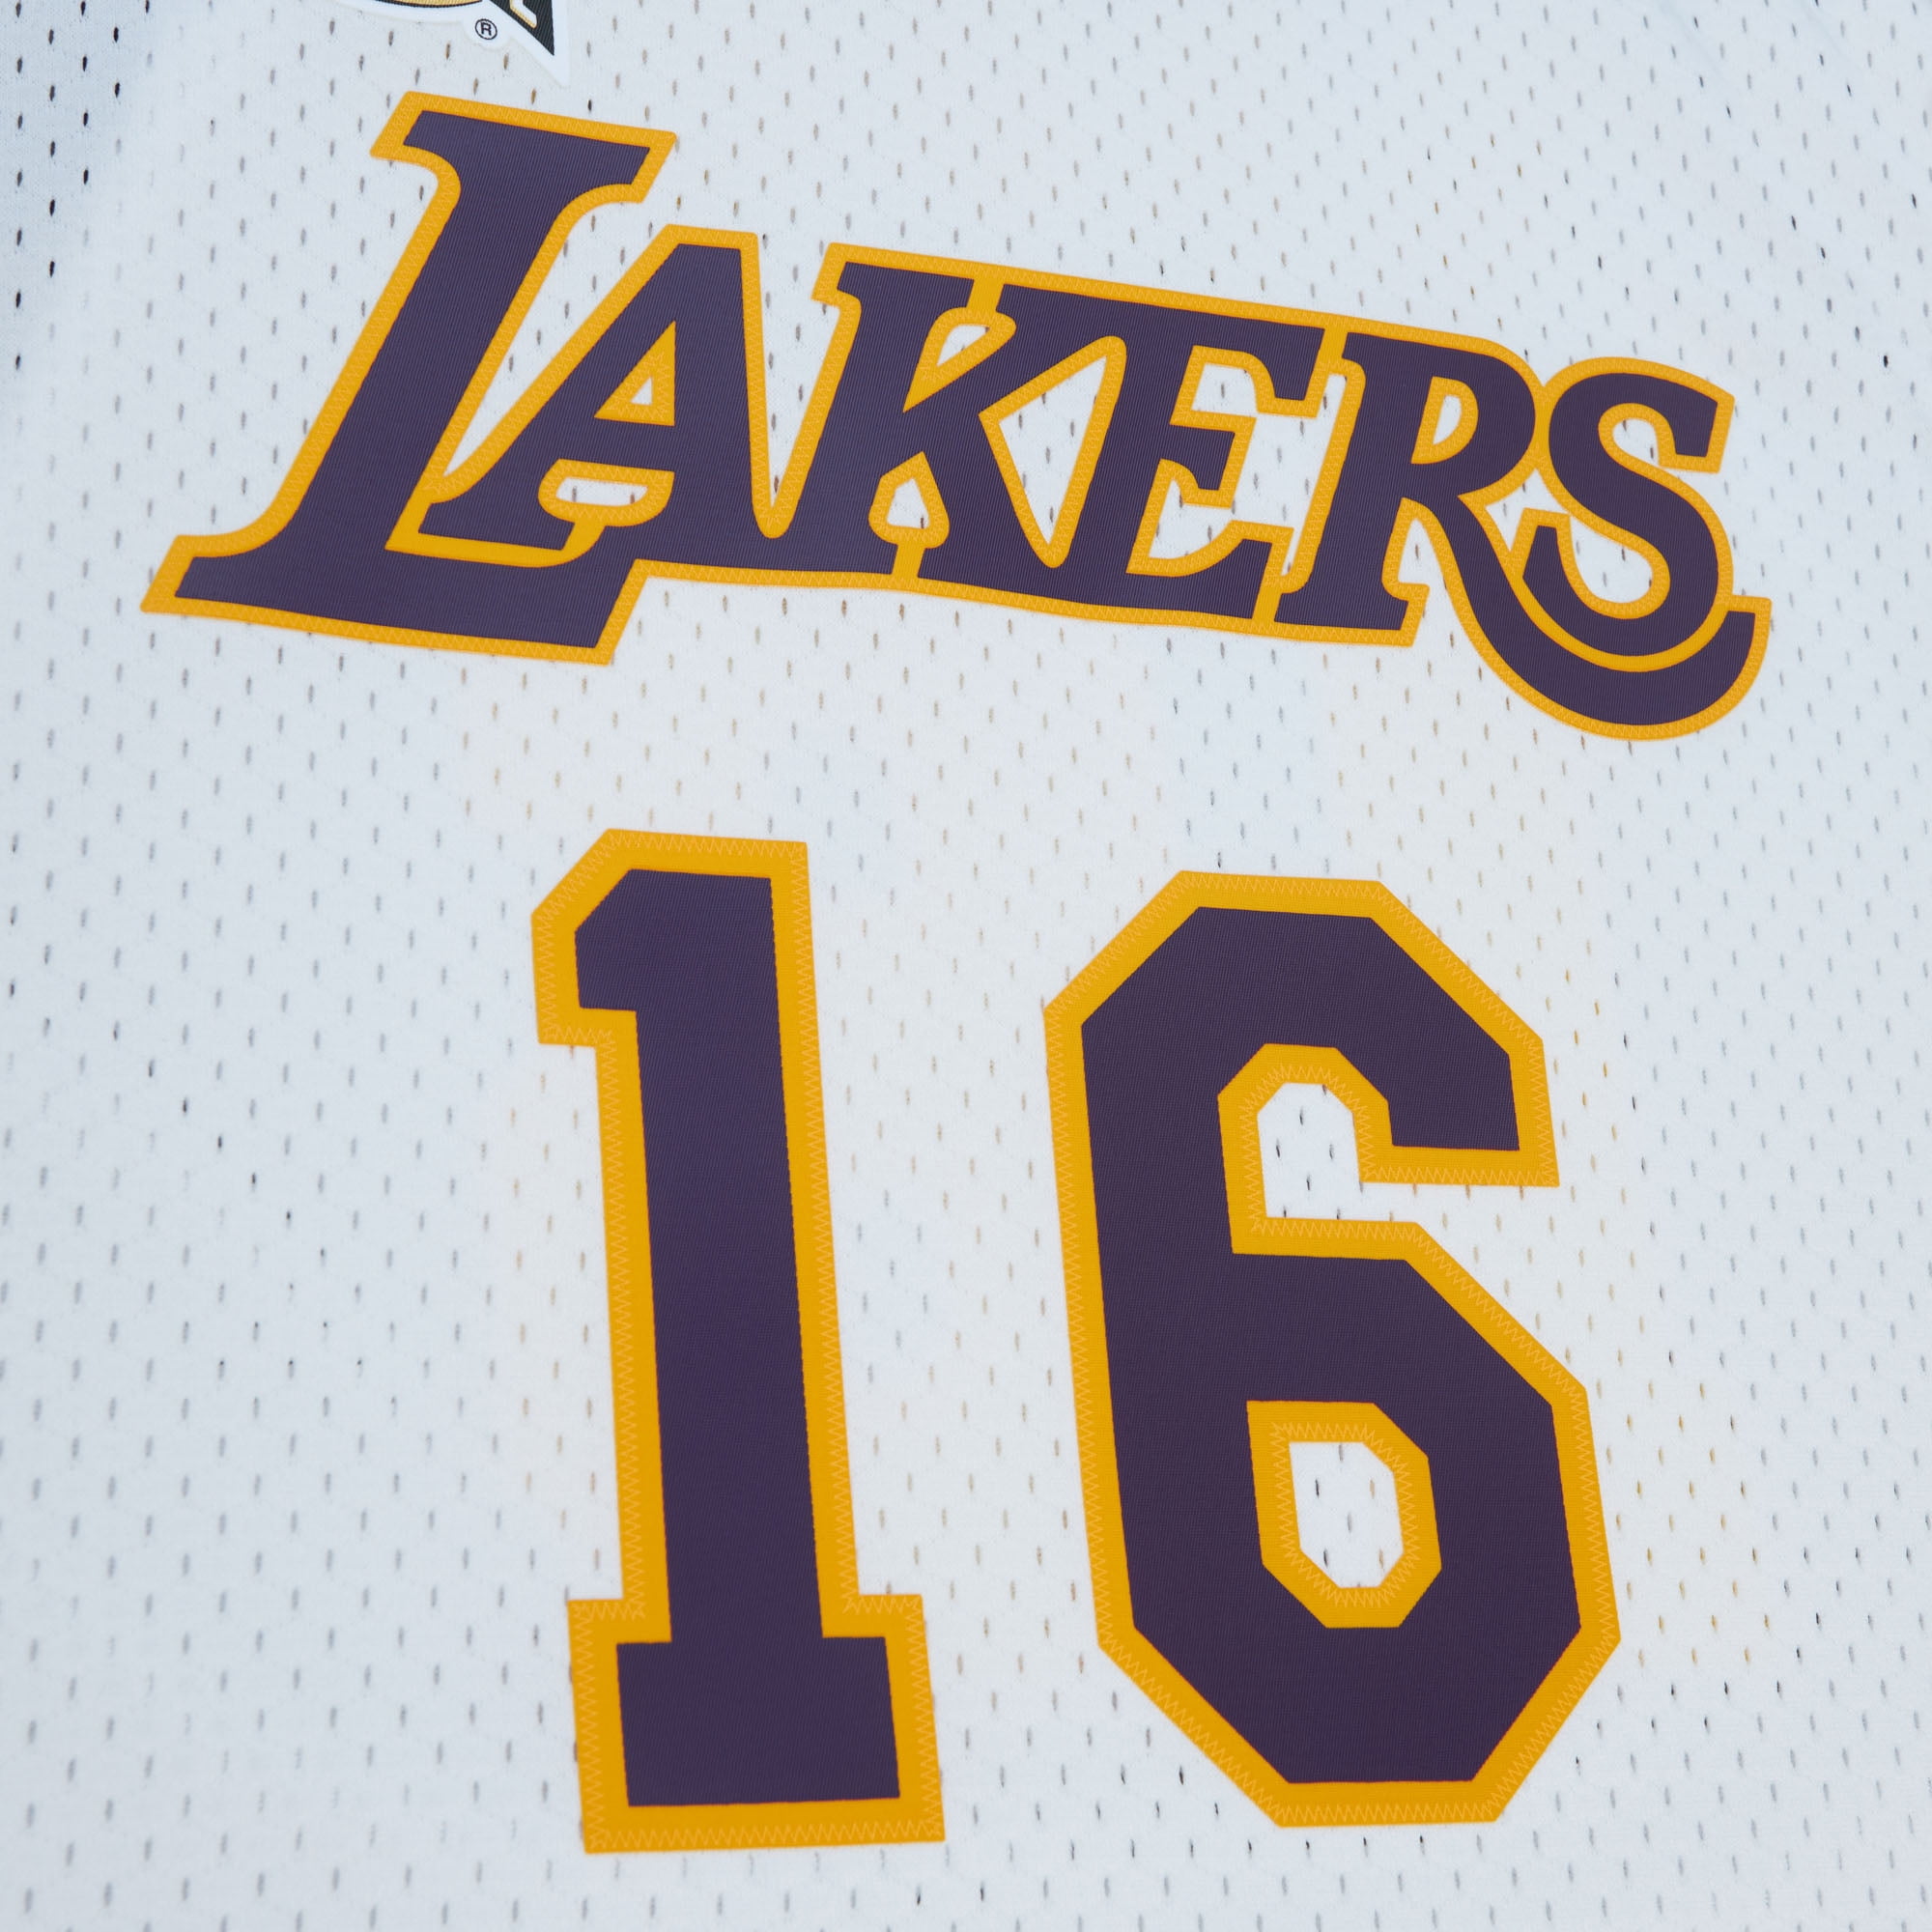 Lakers Hall of Fame jersey